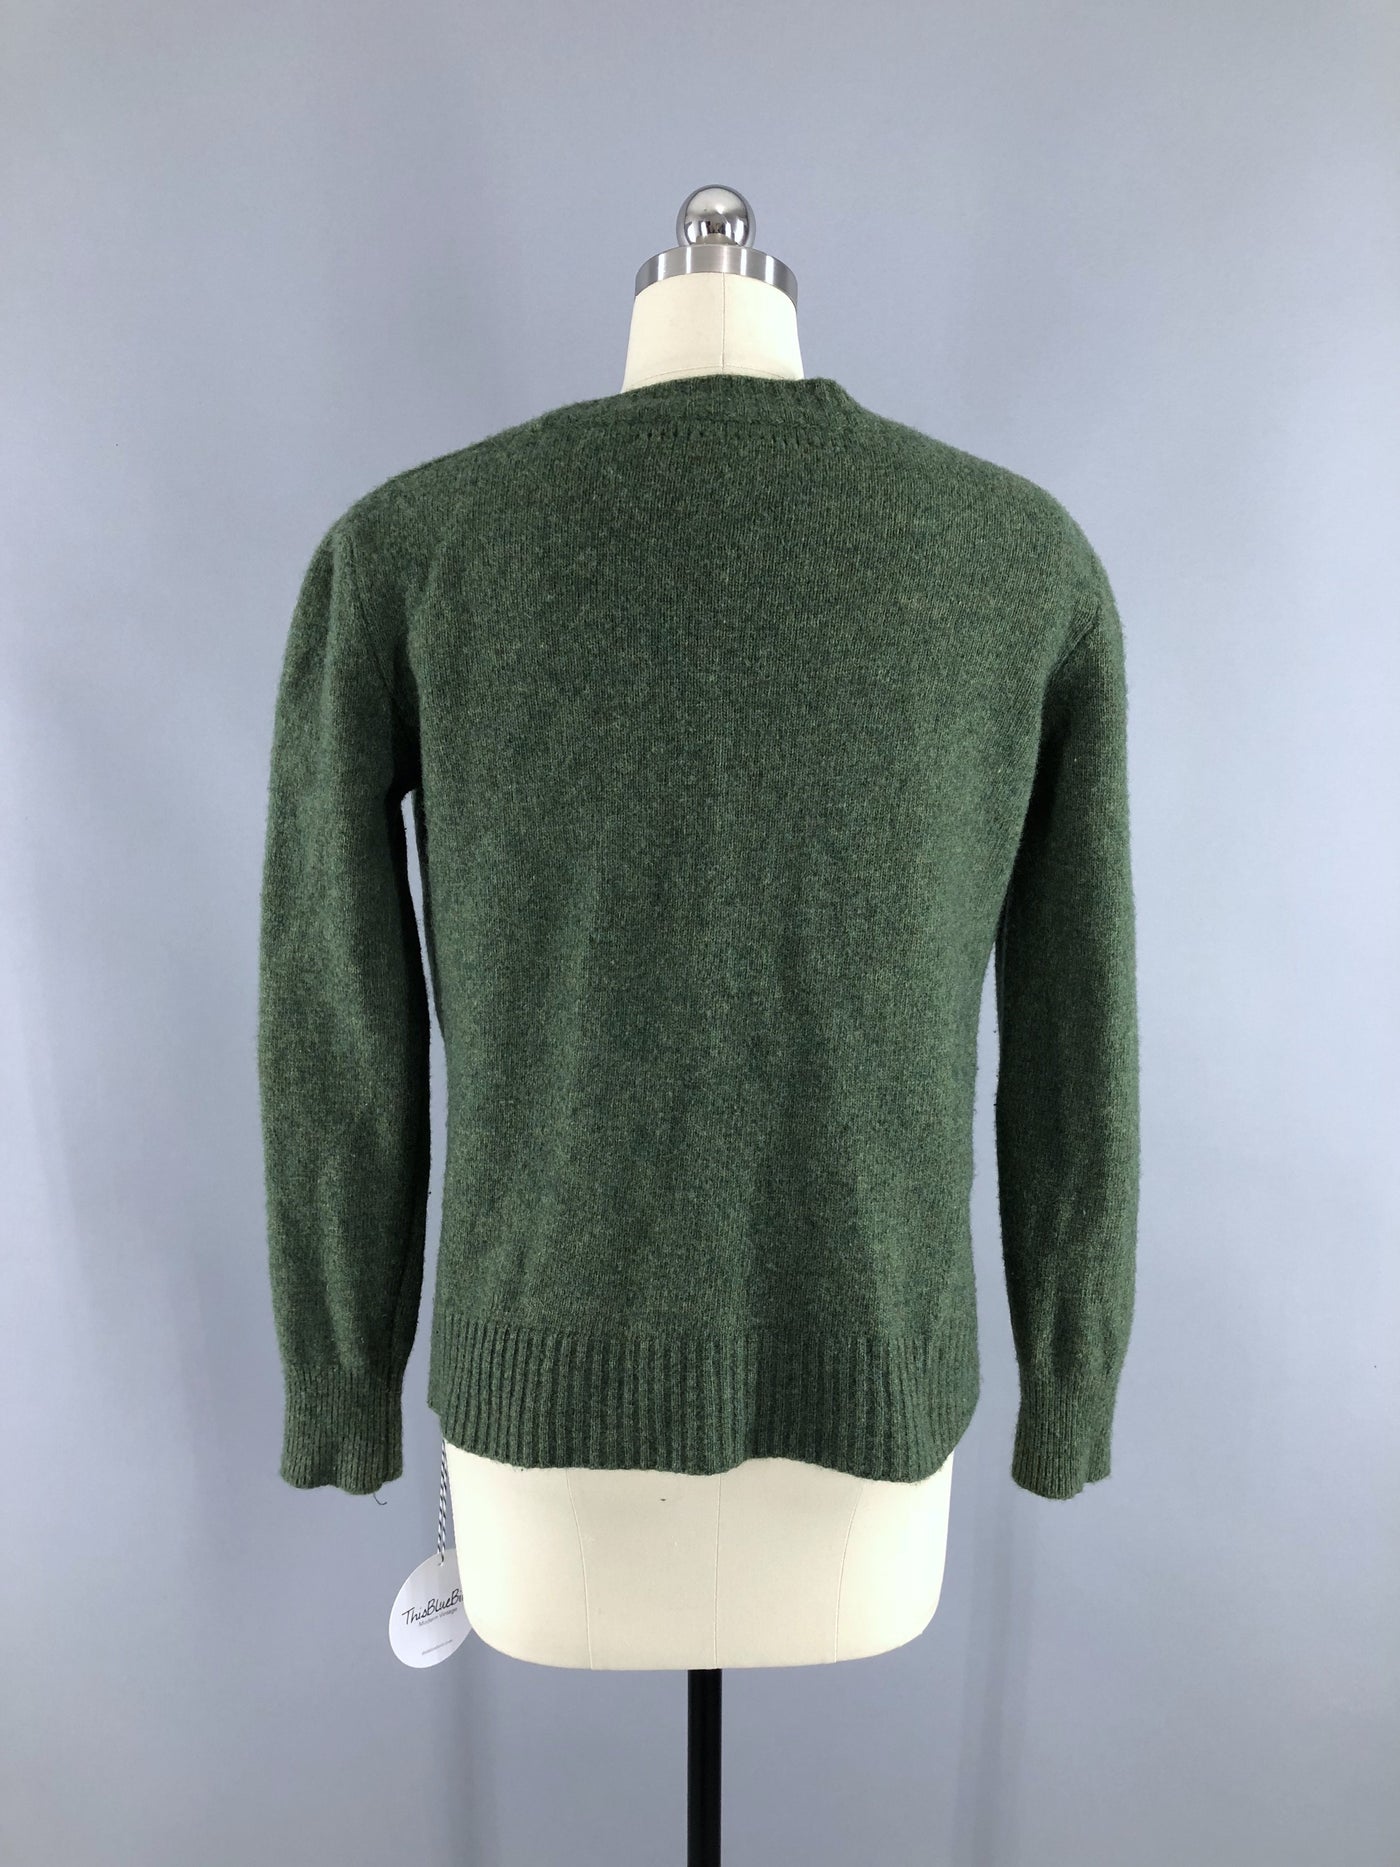 Vintage 1960s Olive Army Green Cashmere Blend Cardigan Sweater - ThisBlueBird